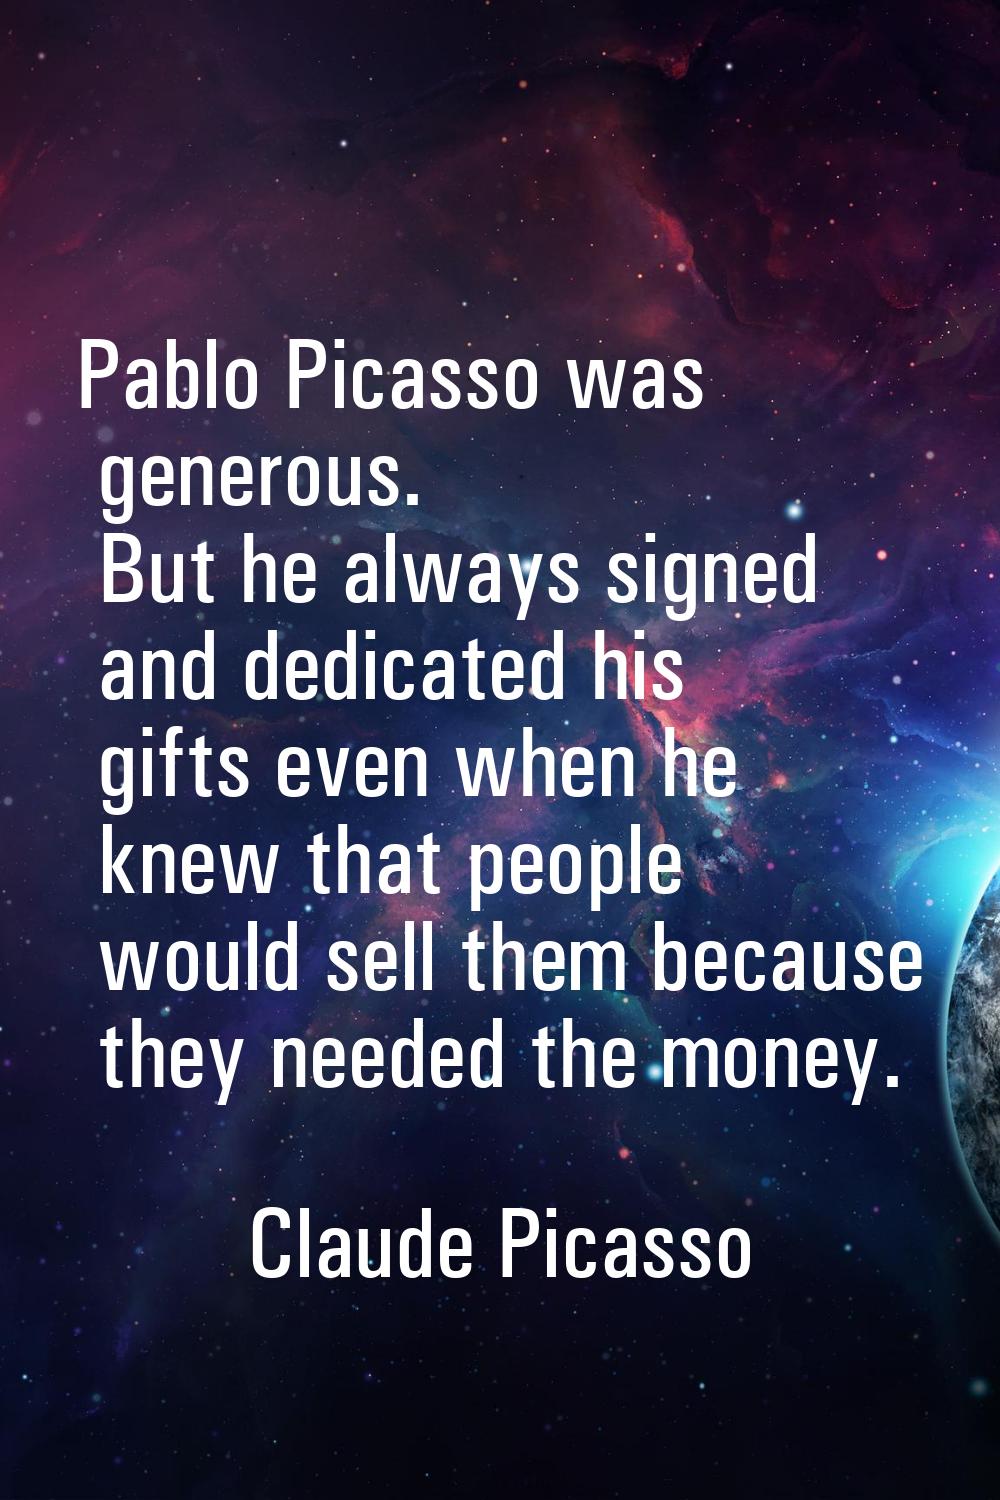 Pablo Picasso was generous. But he always signed and dedicated his gifts even when he knew that peo